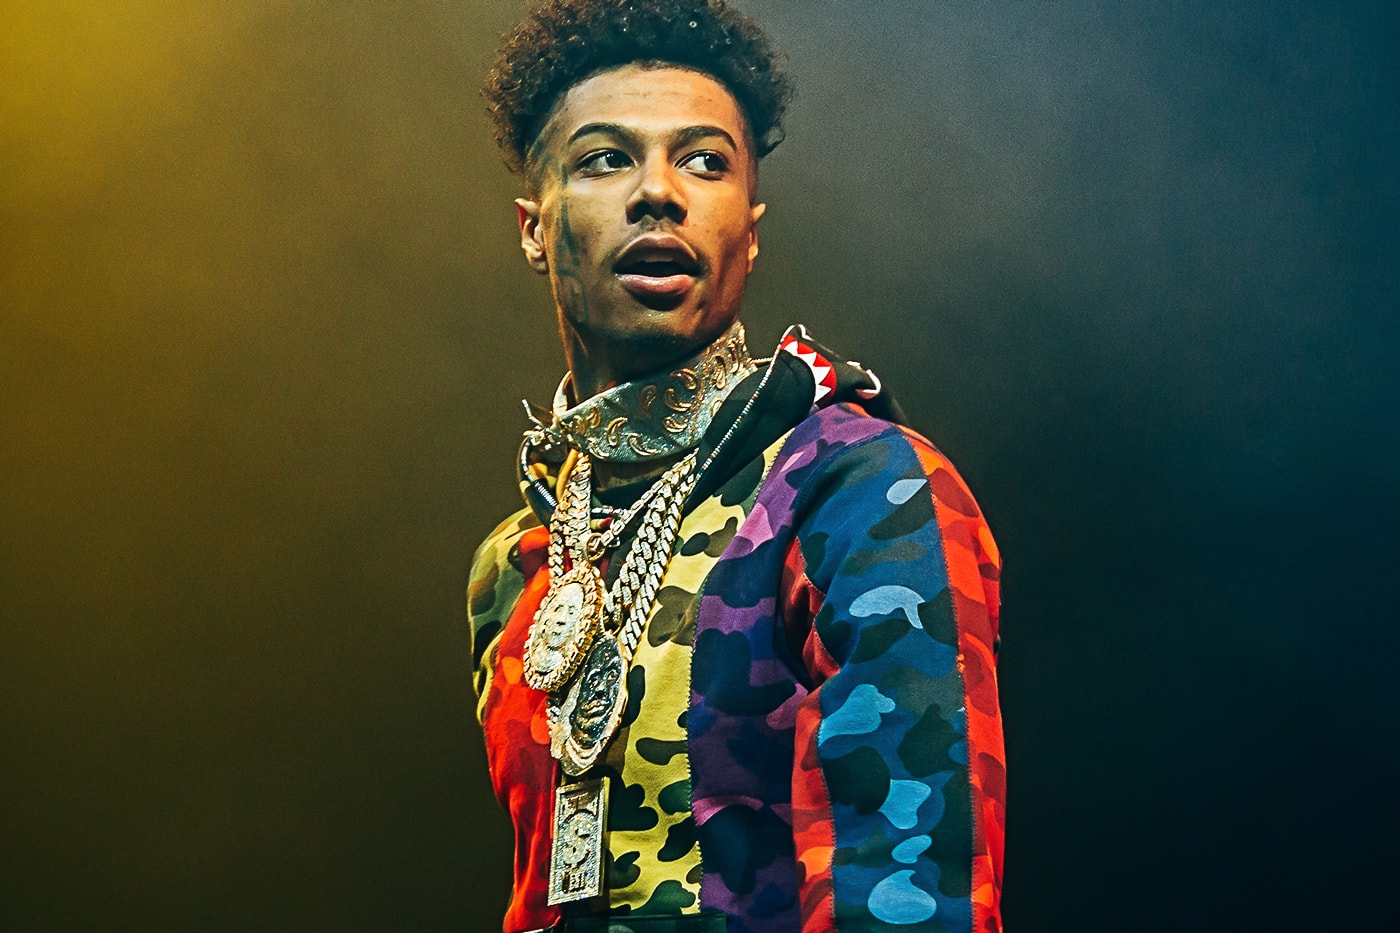 Blueface Los angeles california Mansion Airbnb apartment living space house home 2500 usd hotianna rapper hip hop artist songs tracks